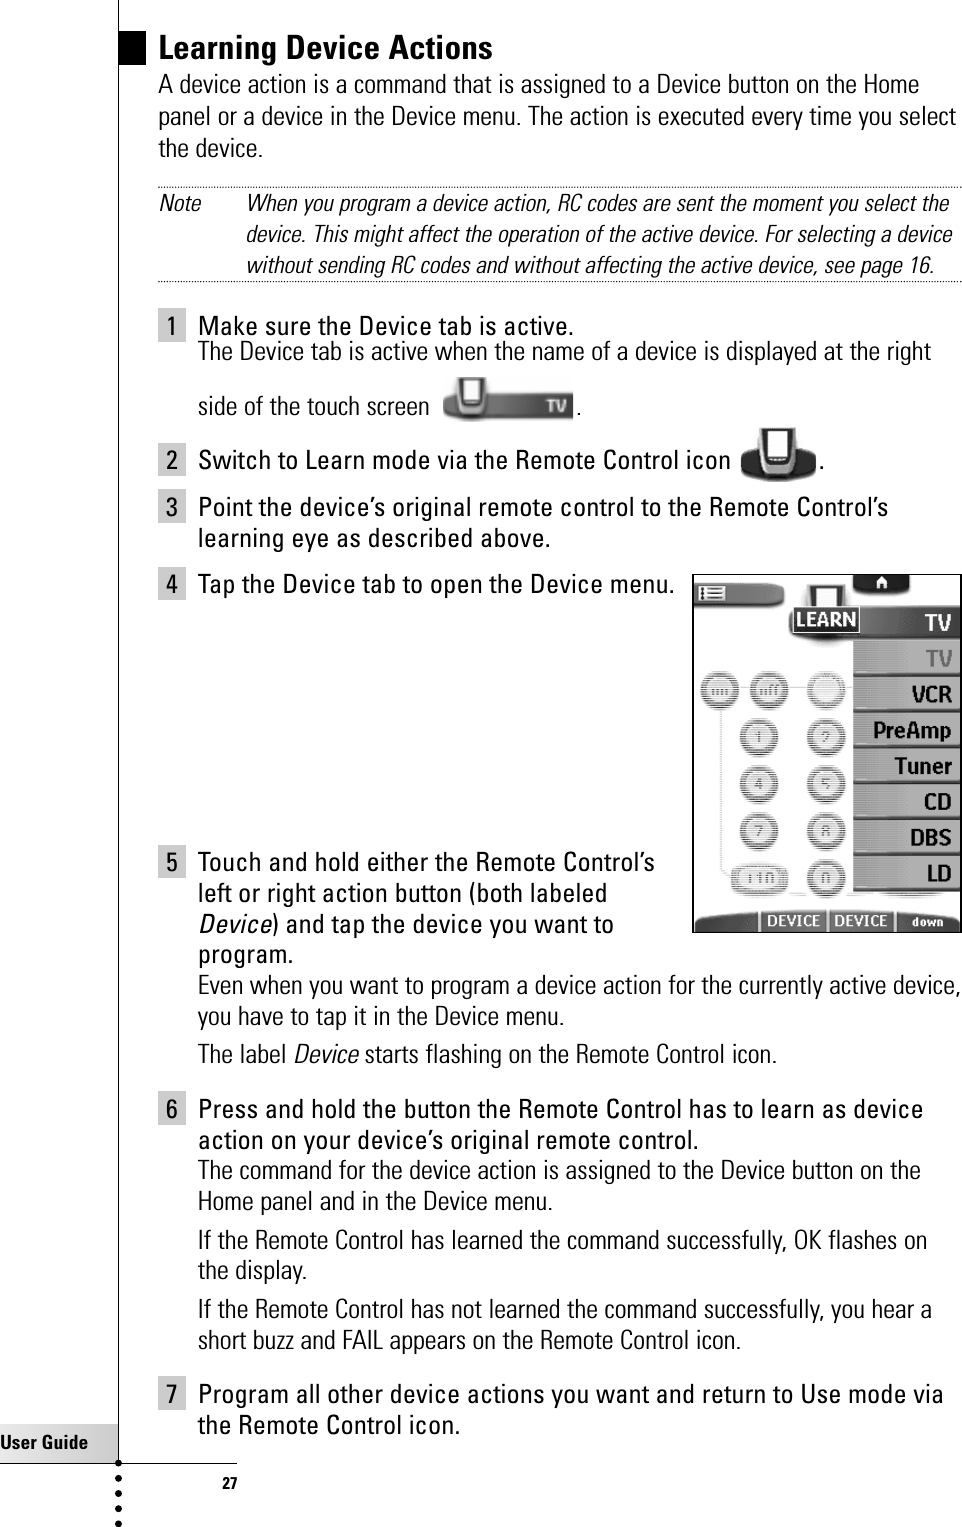 User Guide27Learning Device ActionsA device action is a command that is assigned to a Device button on the Homepanel or a device in the Device menu. The action is executed every time you selectthe device.Note When you program a device action, RC codes are sent the moment you select thedevice. This might affect the operation of the active device. For selecting a devicewithout sending RC codes and without affecting the active device, see page 16.1 Make sure the Device tab is active.The Device tab is active when the name of a device is displayed at the rightside of the touch screen .2 Switch to Learn mode via the Remote Control icon  .3 Point the device’s original remote control to the Remote Control’slearning eye as described above.4 Tap the Device tab to open the Device menu.5 Touch and hold either the Remote Control’s left or right action button (both labeled Device) and tap the device you want to program.Even when you want to program a device action for the currently active device,you have to tap it in the Device menu.The label Devicestarts flashing on the Remote Control icon.6 Press and hold the button the Remote Control has to learn as deviceaction on your device’s original remote control.The command for the device action is assigned to the Device button on theHome panel and in the Device menu.If the Remote Control has learned the command successfully, OK flashes onthe display.If the Remote Control has not learned the command successfully, you hear ashort buzz and FAIL appears on the Remote Control icon.7 Program all other device actions you want and return to Use mode viathe Remote Control icon.Getting the Maximum out of it